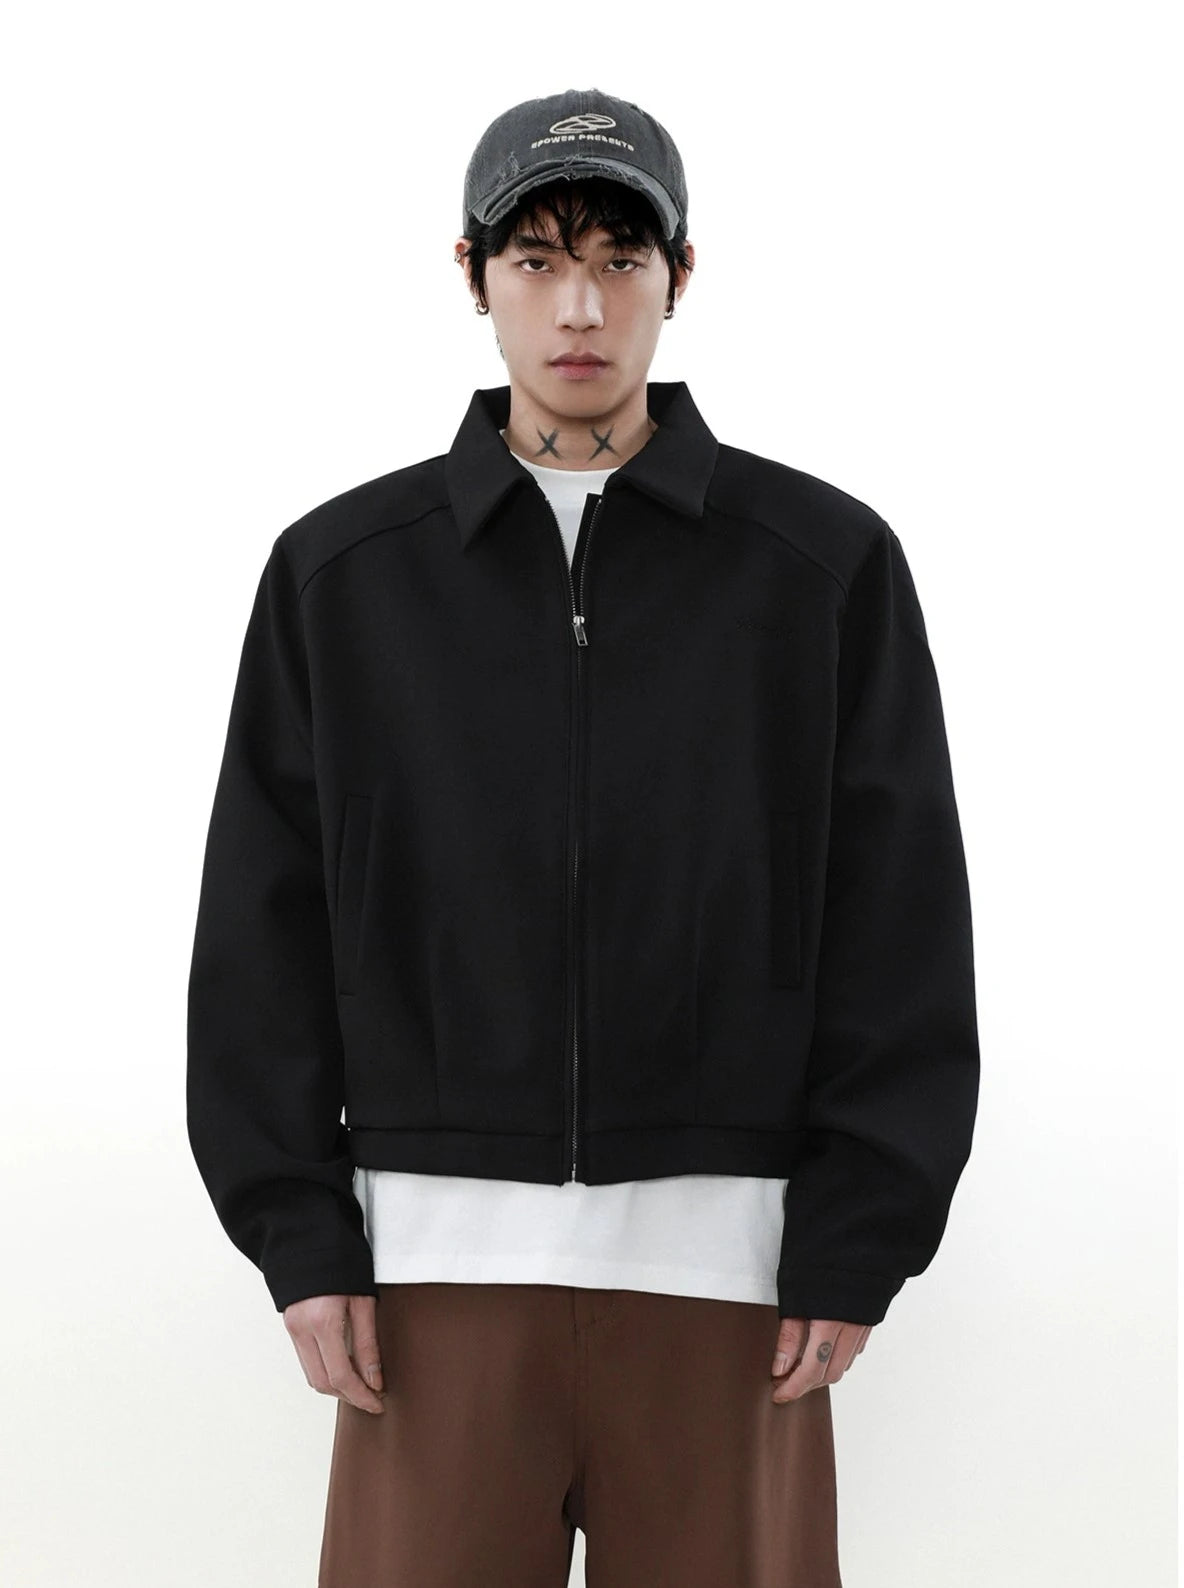 Cropped and Zippered Jacket Korean Street Fashion Jacket By Mr Nearly Shop Online at OH Vault